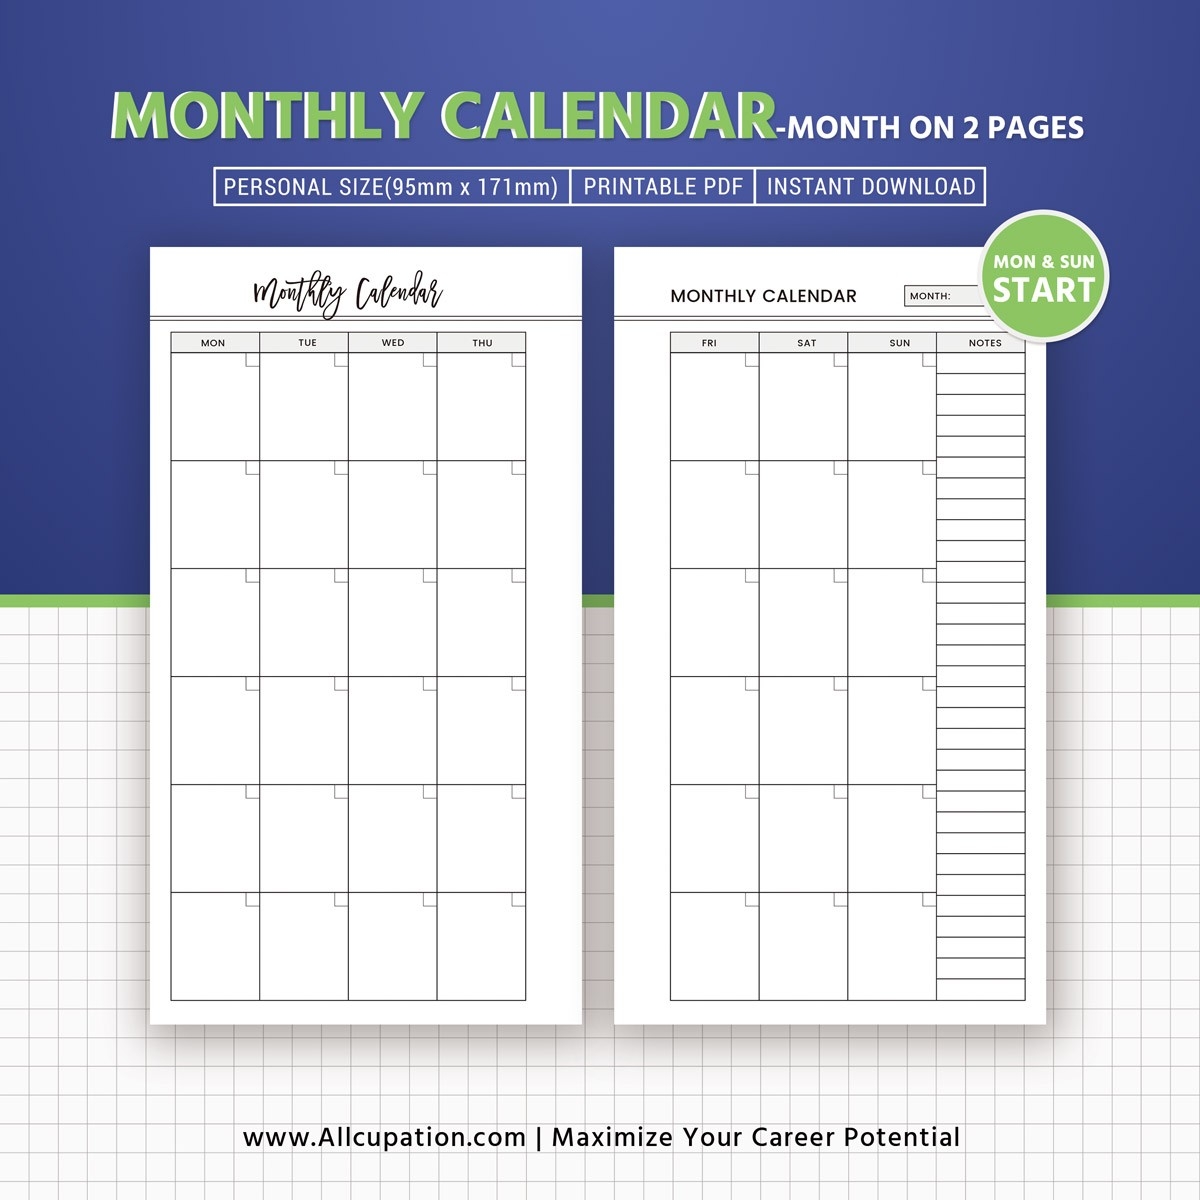 Monthly Calendar 2020, Month On 2 Pages, Printable Personal-Printable Blank Monthly Calendar 2 Pages